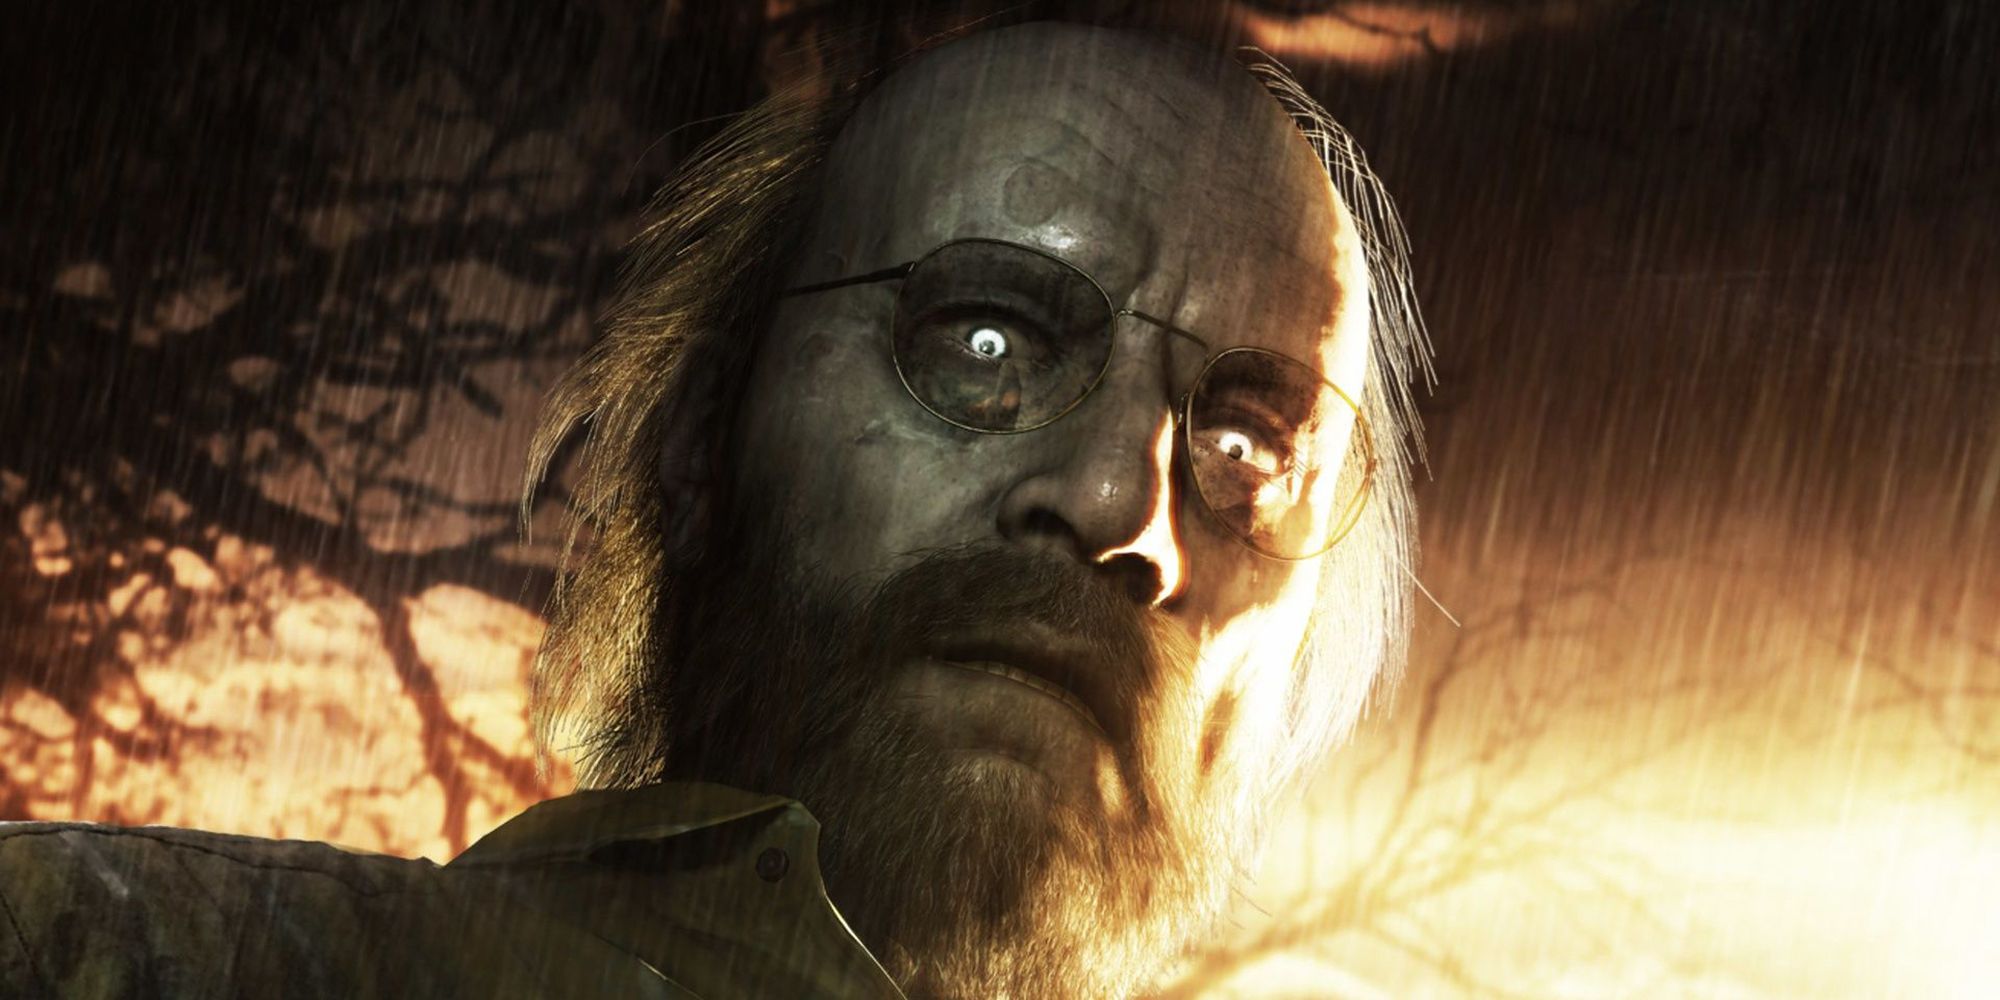 Resident Evil - Promotional Material For RE7 Showing Closeup Of Jack Baker